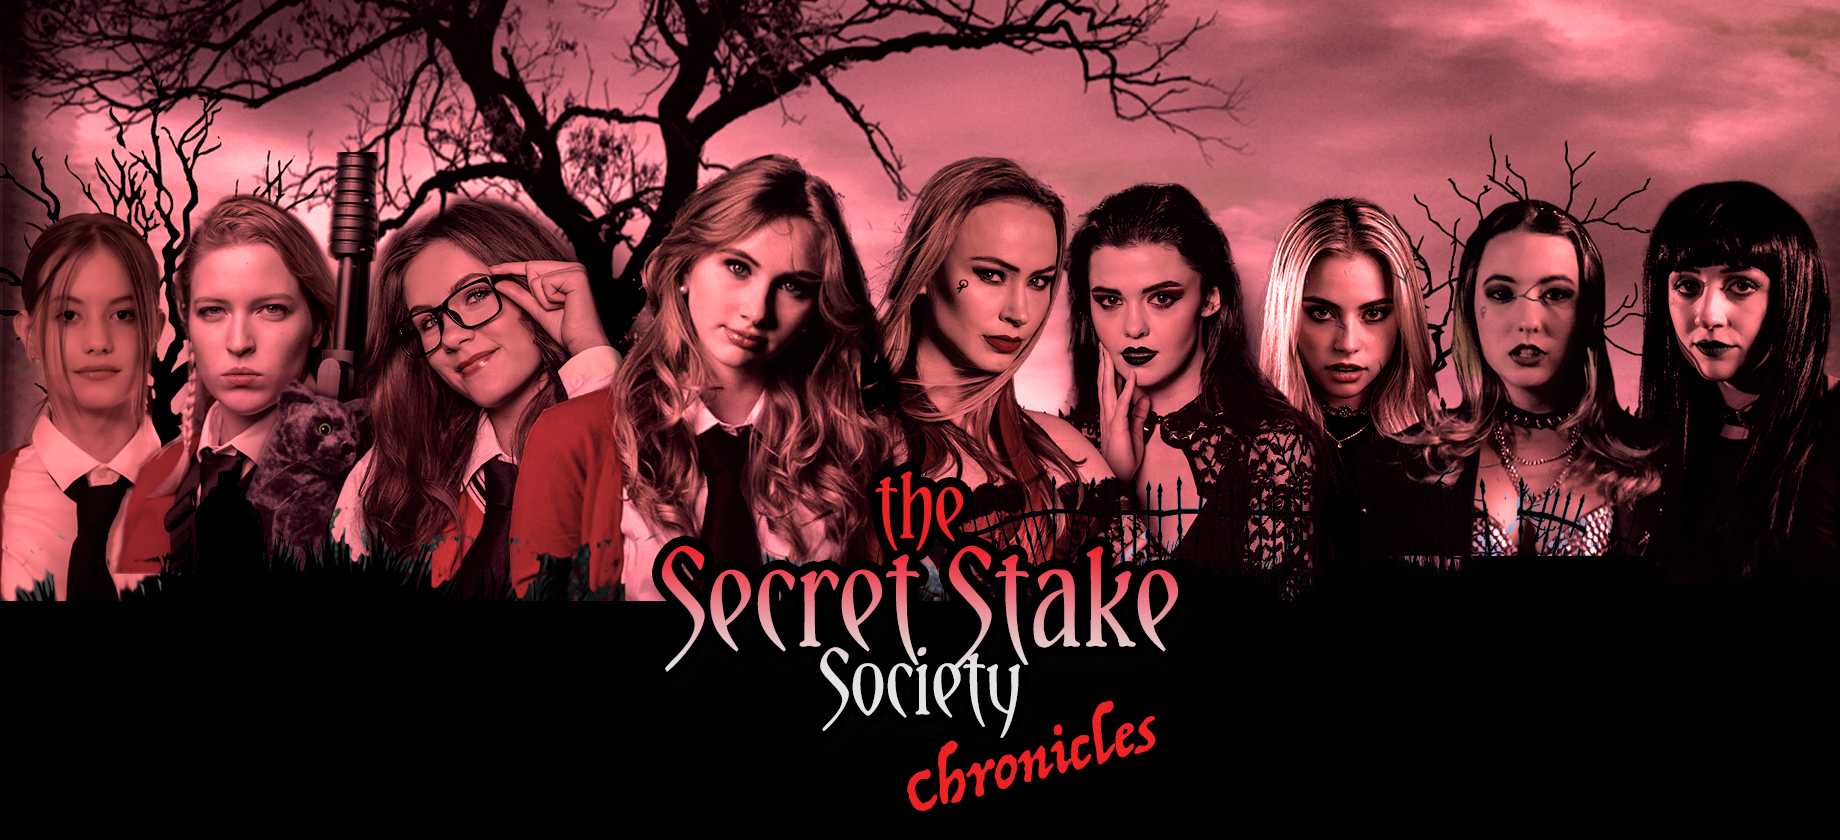 The Secret Stake Society Chronicles